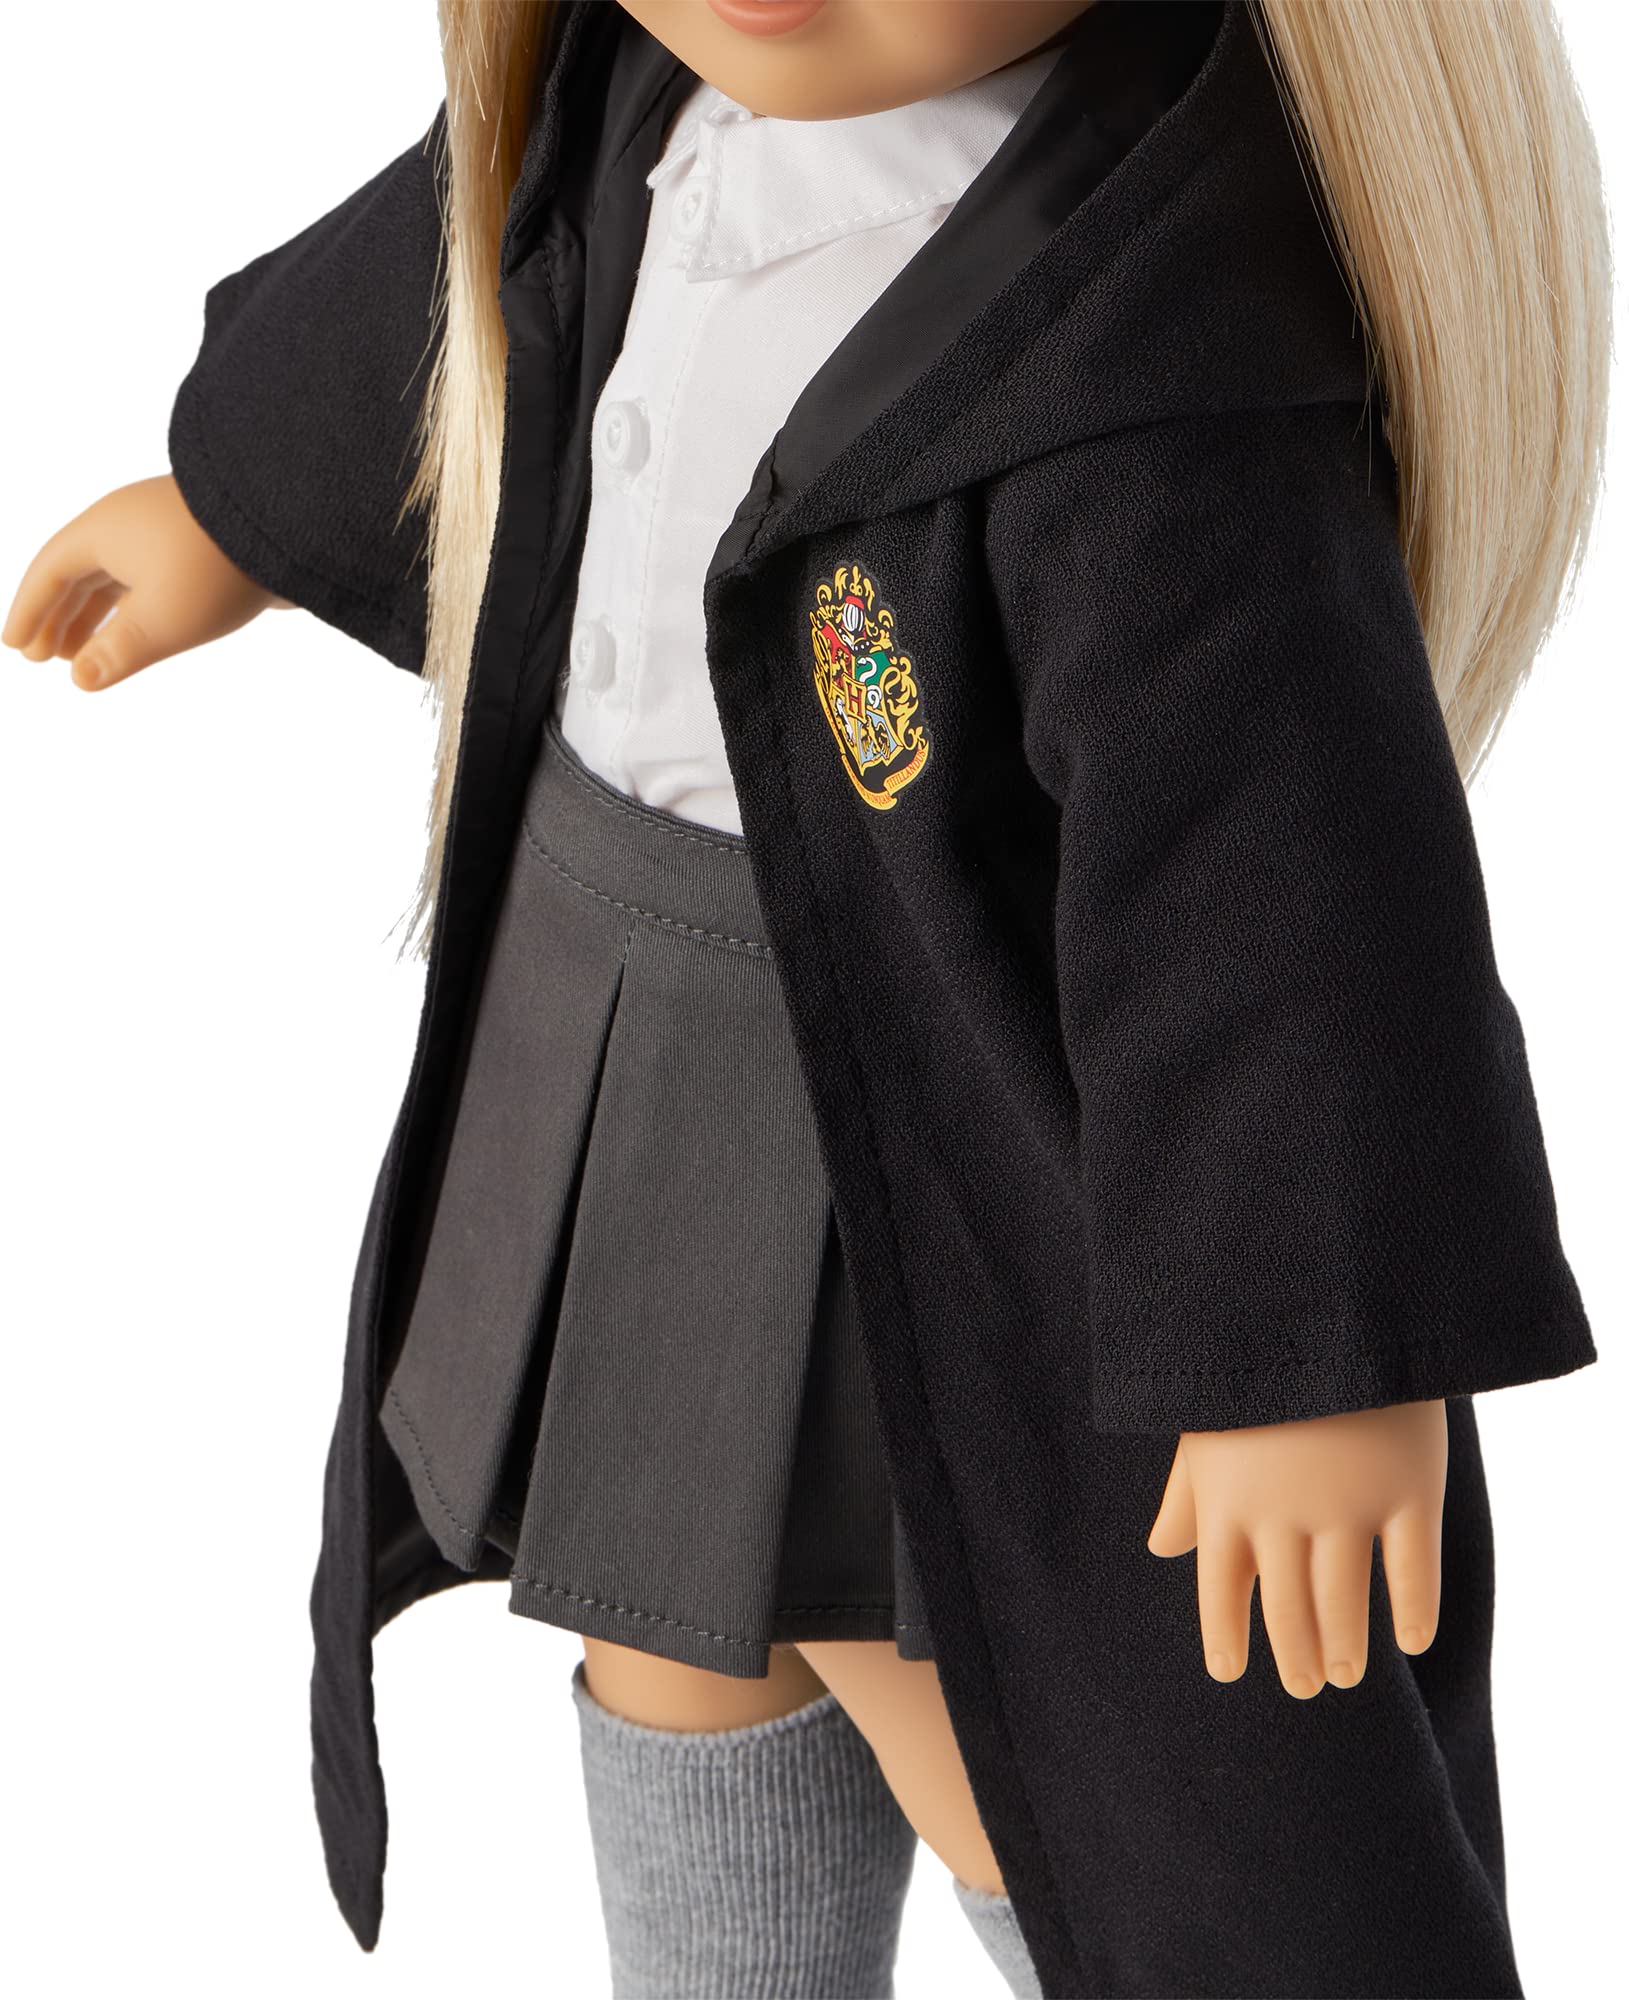 American Girl Harry Potter Hogwarts 5-Piece Uniform for 18-inch Dolls with a Black Robe, a White Button-Front Shirt, and a Pleated Twill Skirt Doll Not Included